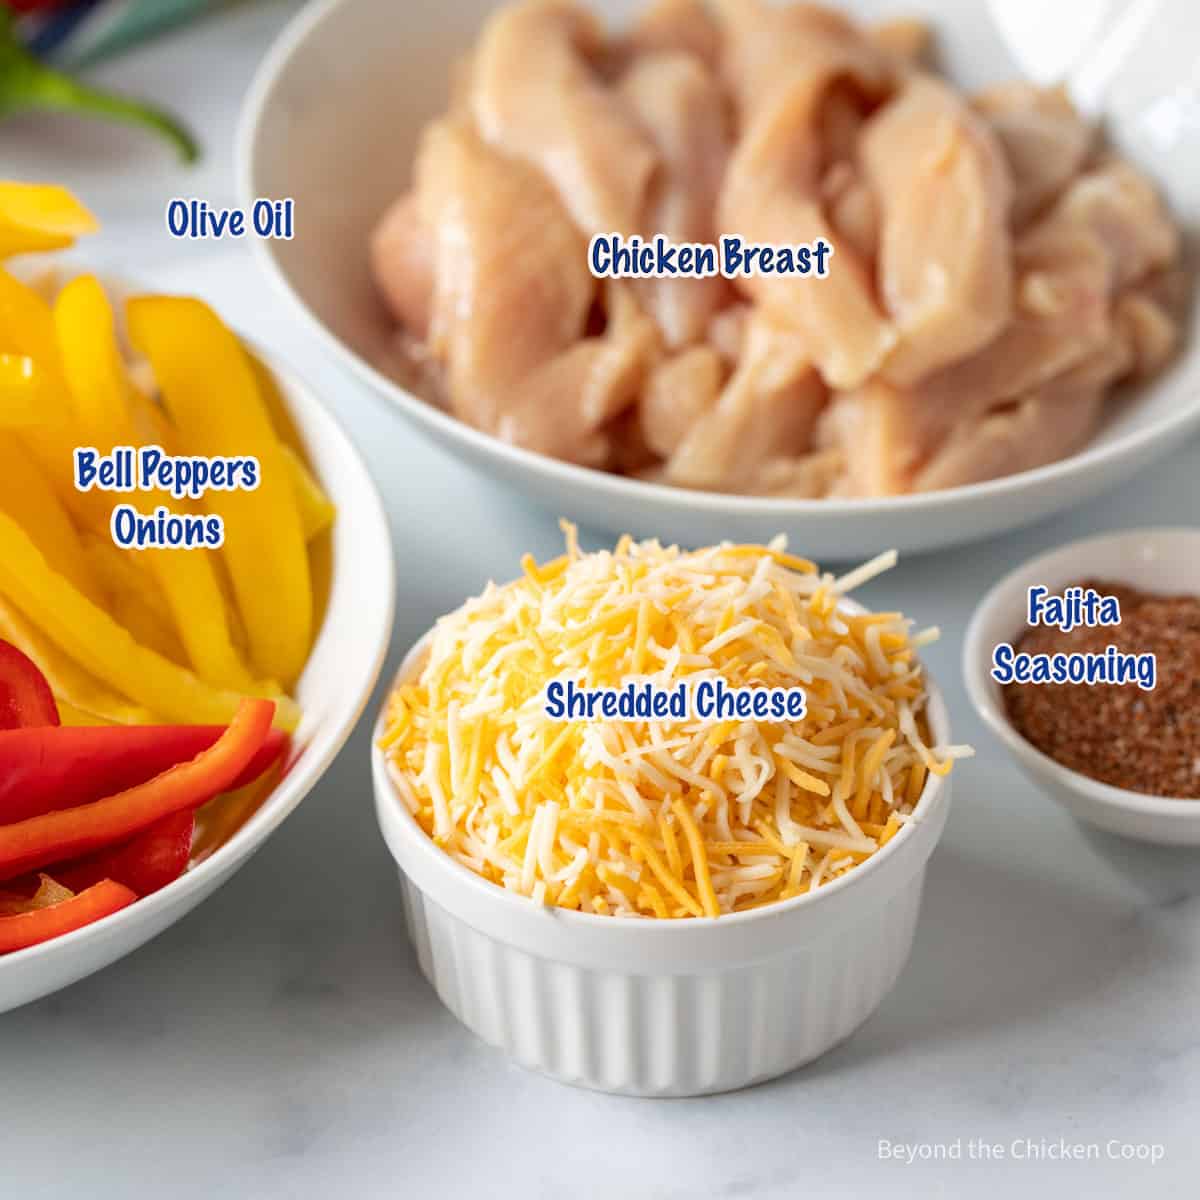 Small bowls filled with sliced chicken, bell peppers and shredded cheese.